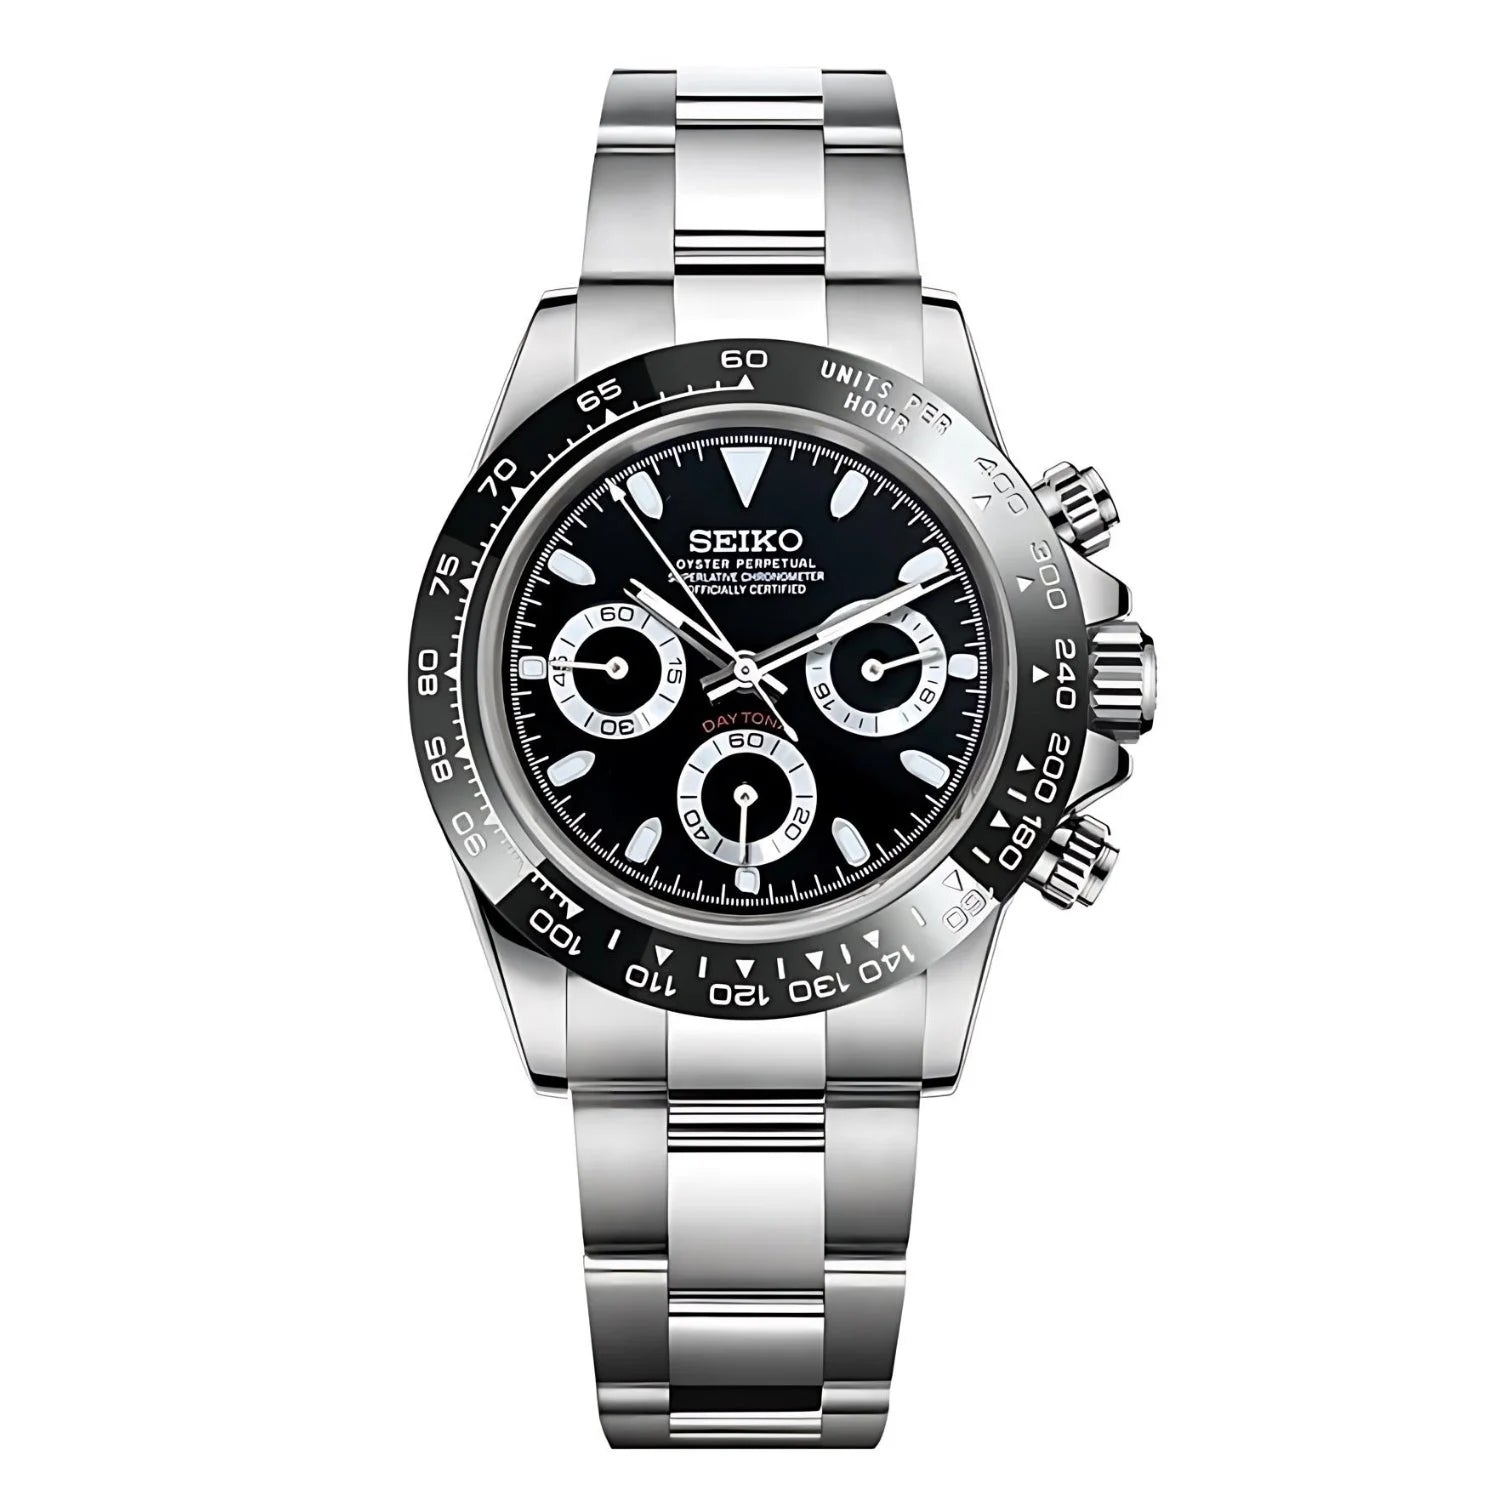 Stainless Steel Seiko Chronograph Watch With Black Dial And Bezel In Seitona Black Case